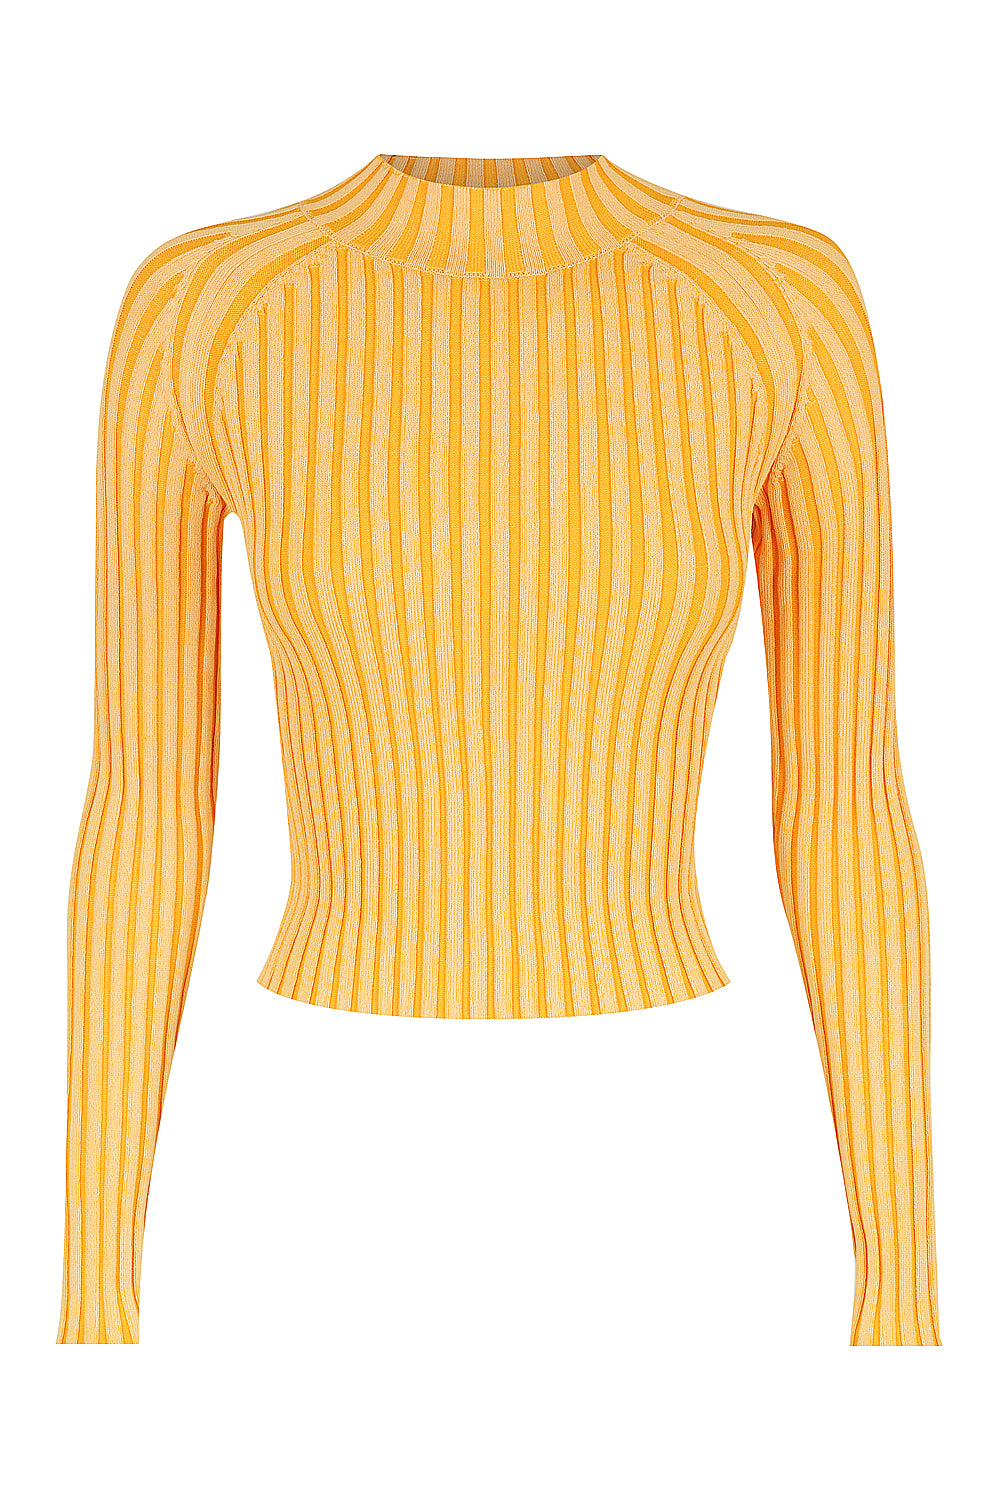 Women’s Yellow / Orange The All Sorts Two-Tone Knit Top - Orange Crush Extra Small St Cloud Label